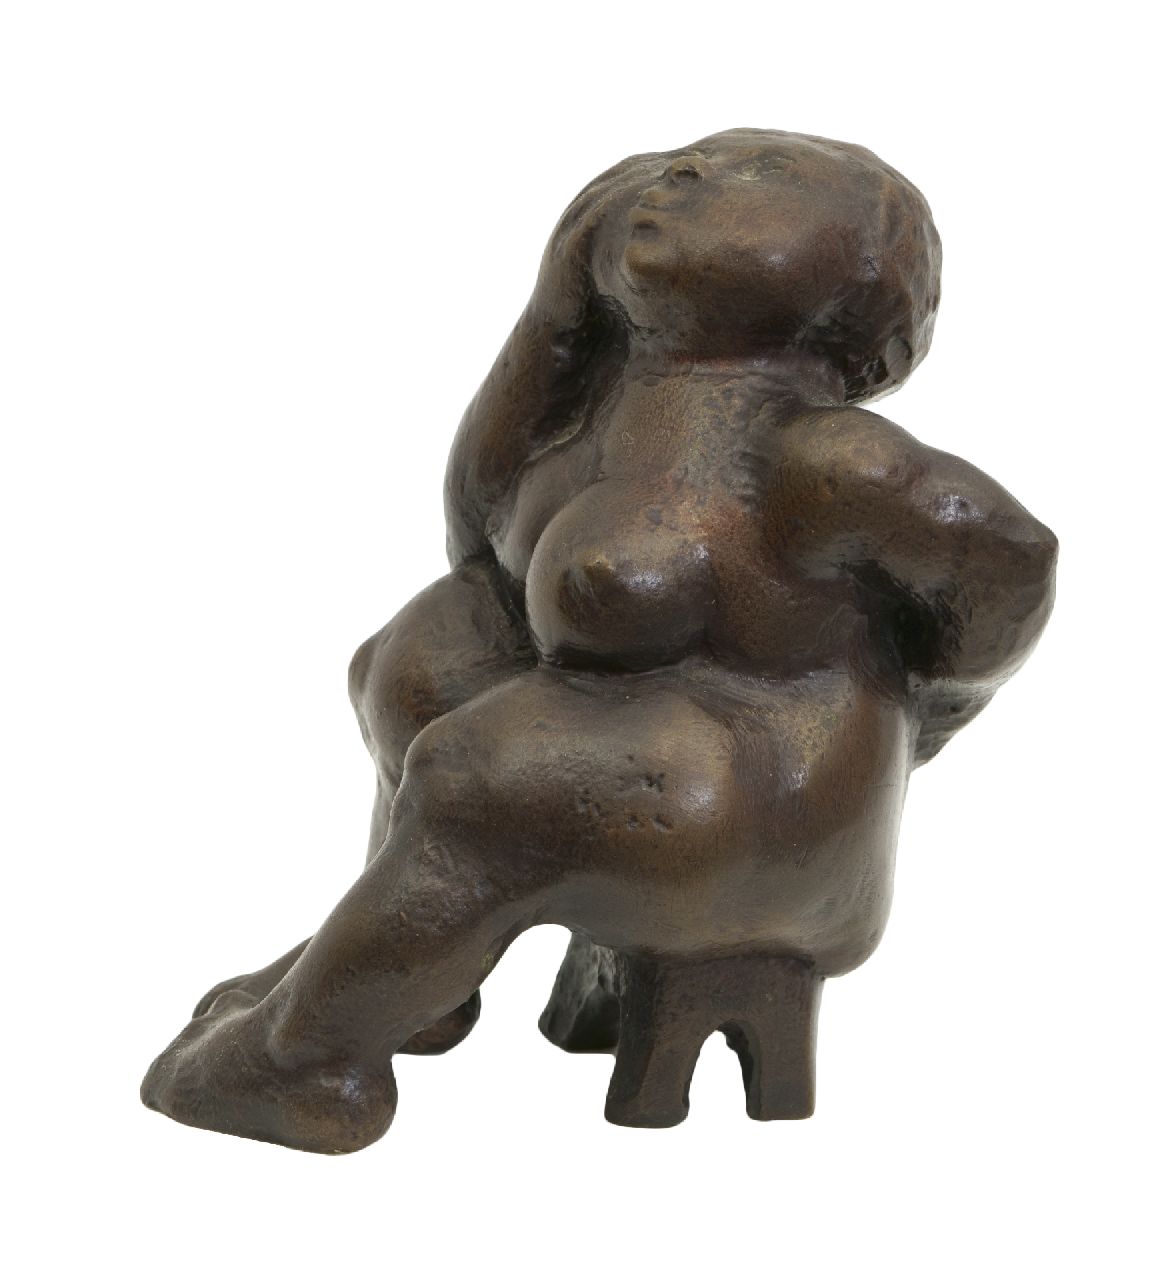 Schwaiger R.  | Rudolf Schwaiger | Sculptures and objects offered for sale | Pain, bronze 10.2 x 6.3 cm, signed on the rear, left (vague)